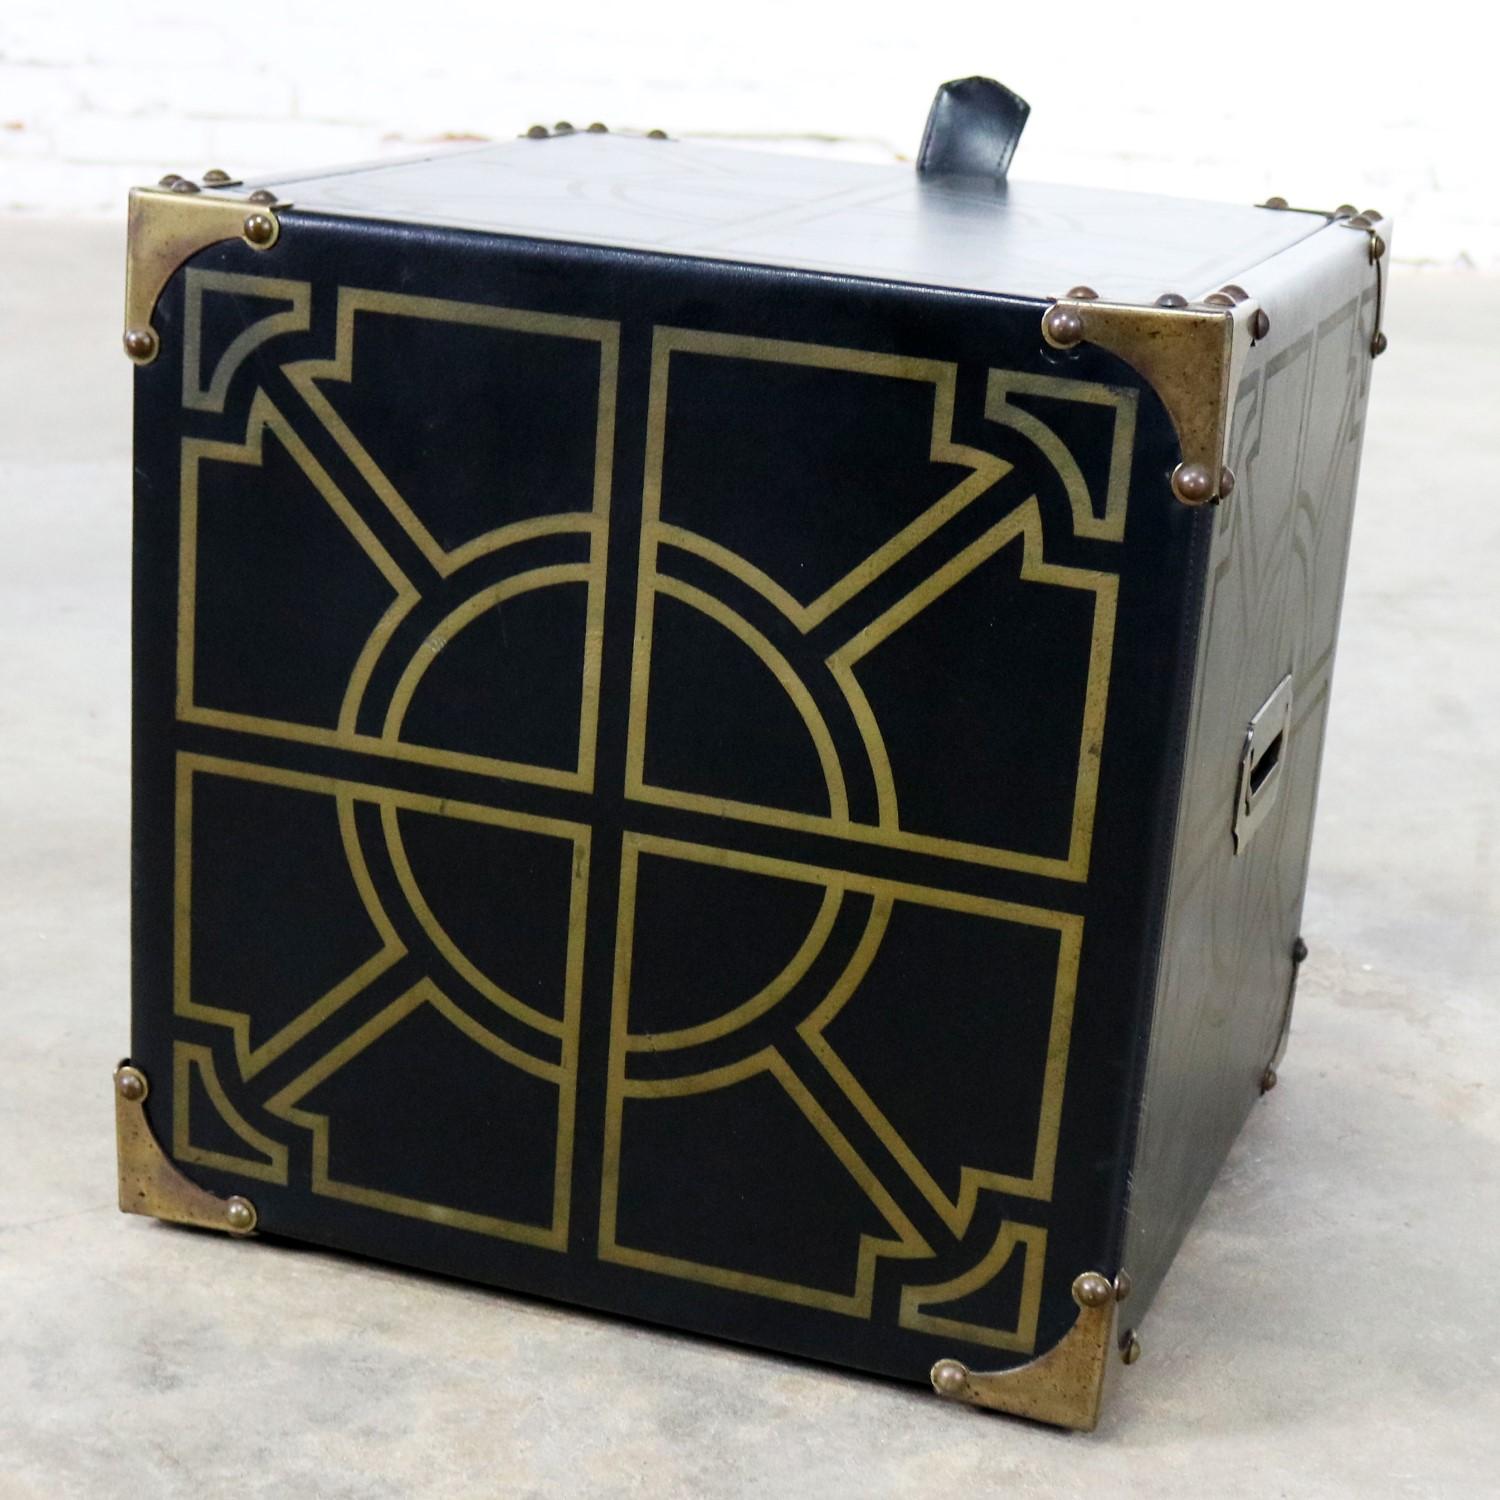 Handsome midcentury Campaign style cube shaped storage ottoman or side table. It is upholstered in black vinyl with gold geometric designs, brass and brass-tone hardware, reversible lid, and its on casters. It is in fabulous vintage condition with